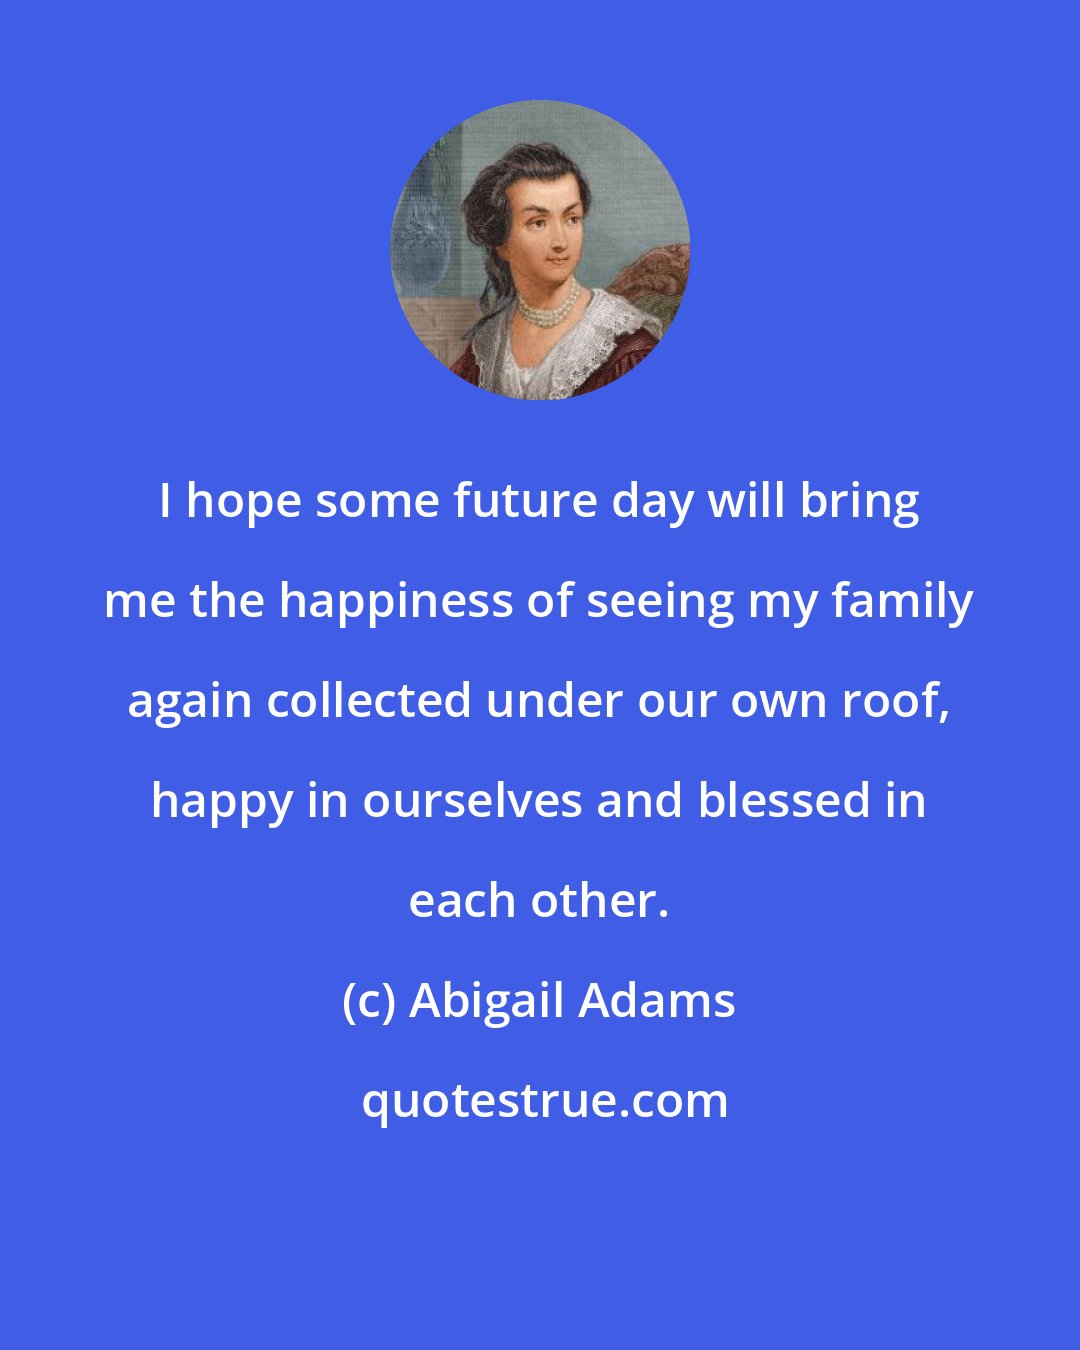 Abigail Adams: I hope some future day will bring me the happiness of seeing my family again collected under our own roof, happy in ourselves and blessed in each other.